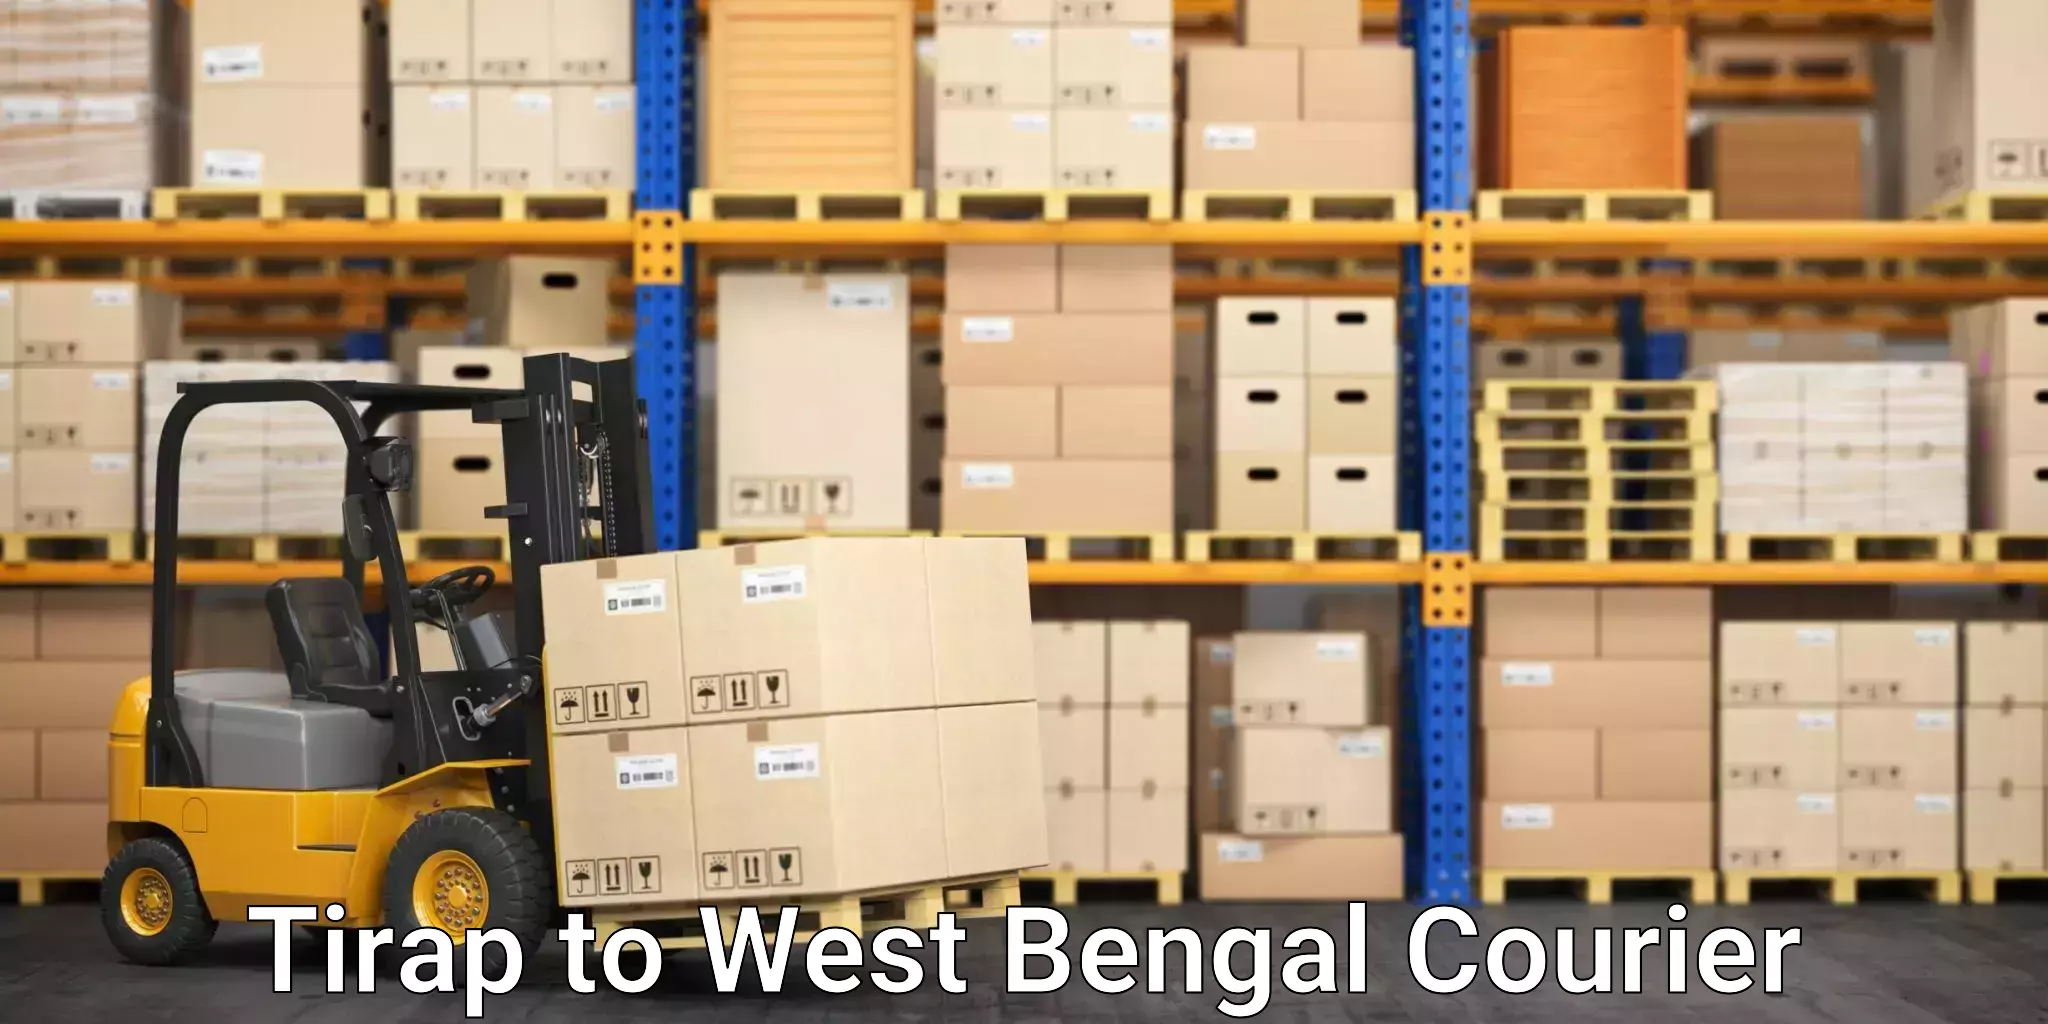 Smart shipping technology Tirap to West Bengal